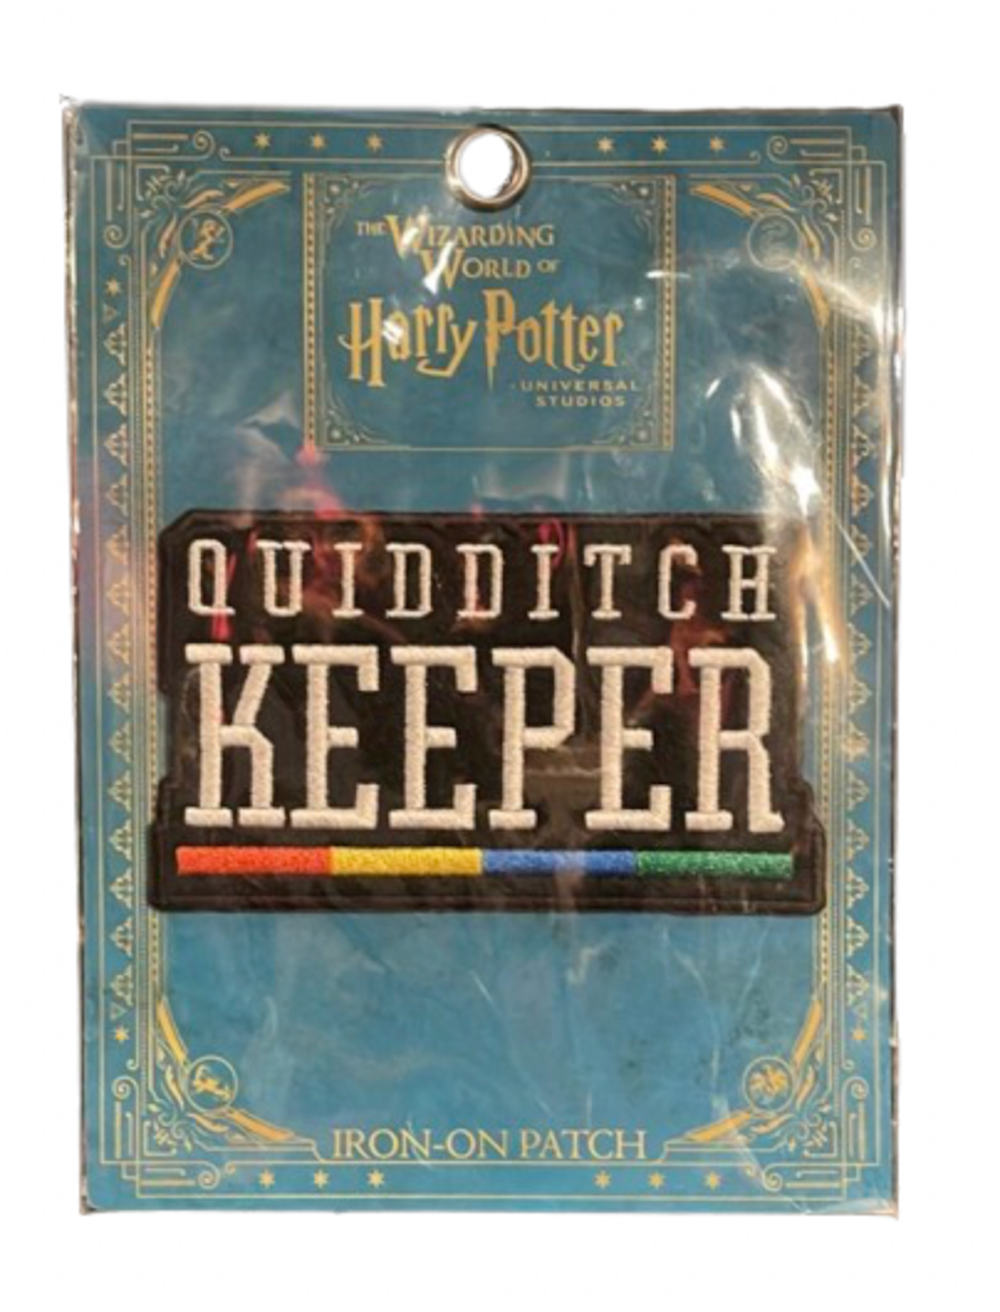 Universal Studios Harry Potter Quidditch Keeper Iron on Patch New with Card